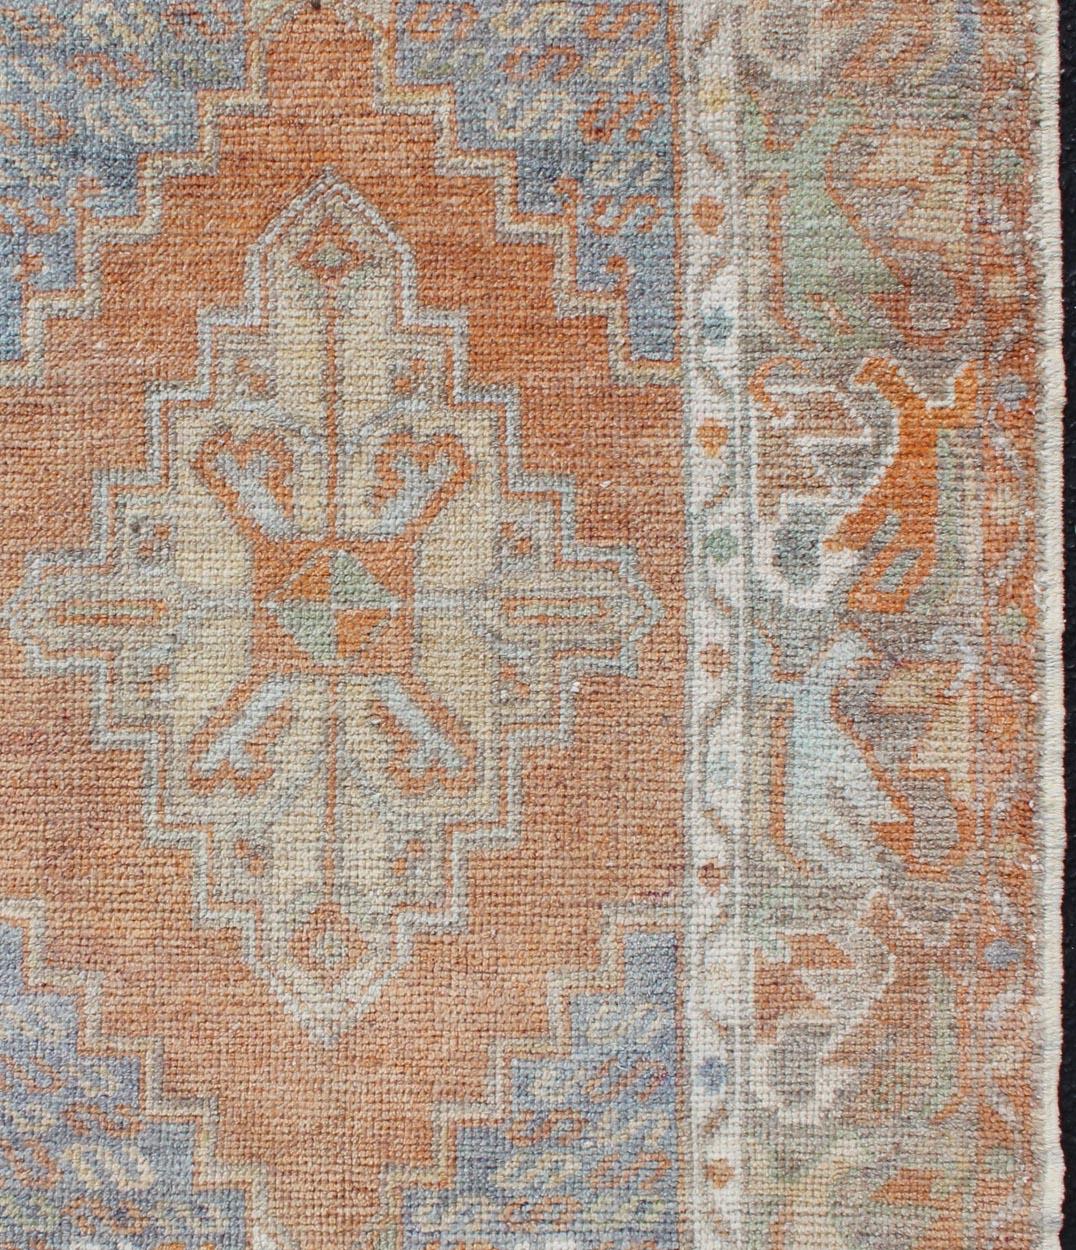 Vintage Oushak small carpet from Turkey in light orange and light Blue & L.Green, rug EN-179663, country of origin / type: Turkey / Oushak, circa 1950

This vintage Turkish oushak rug features an intricately designed medallion resting in the